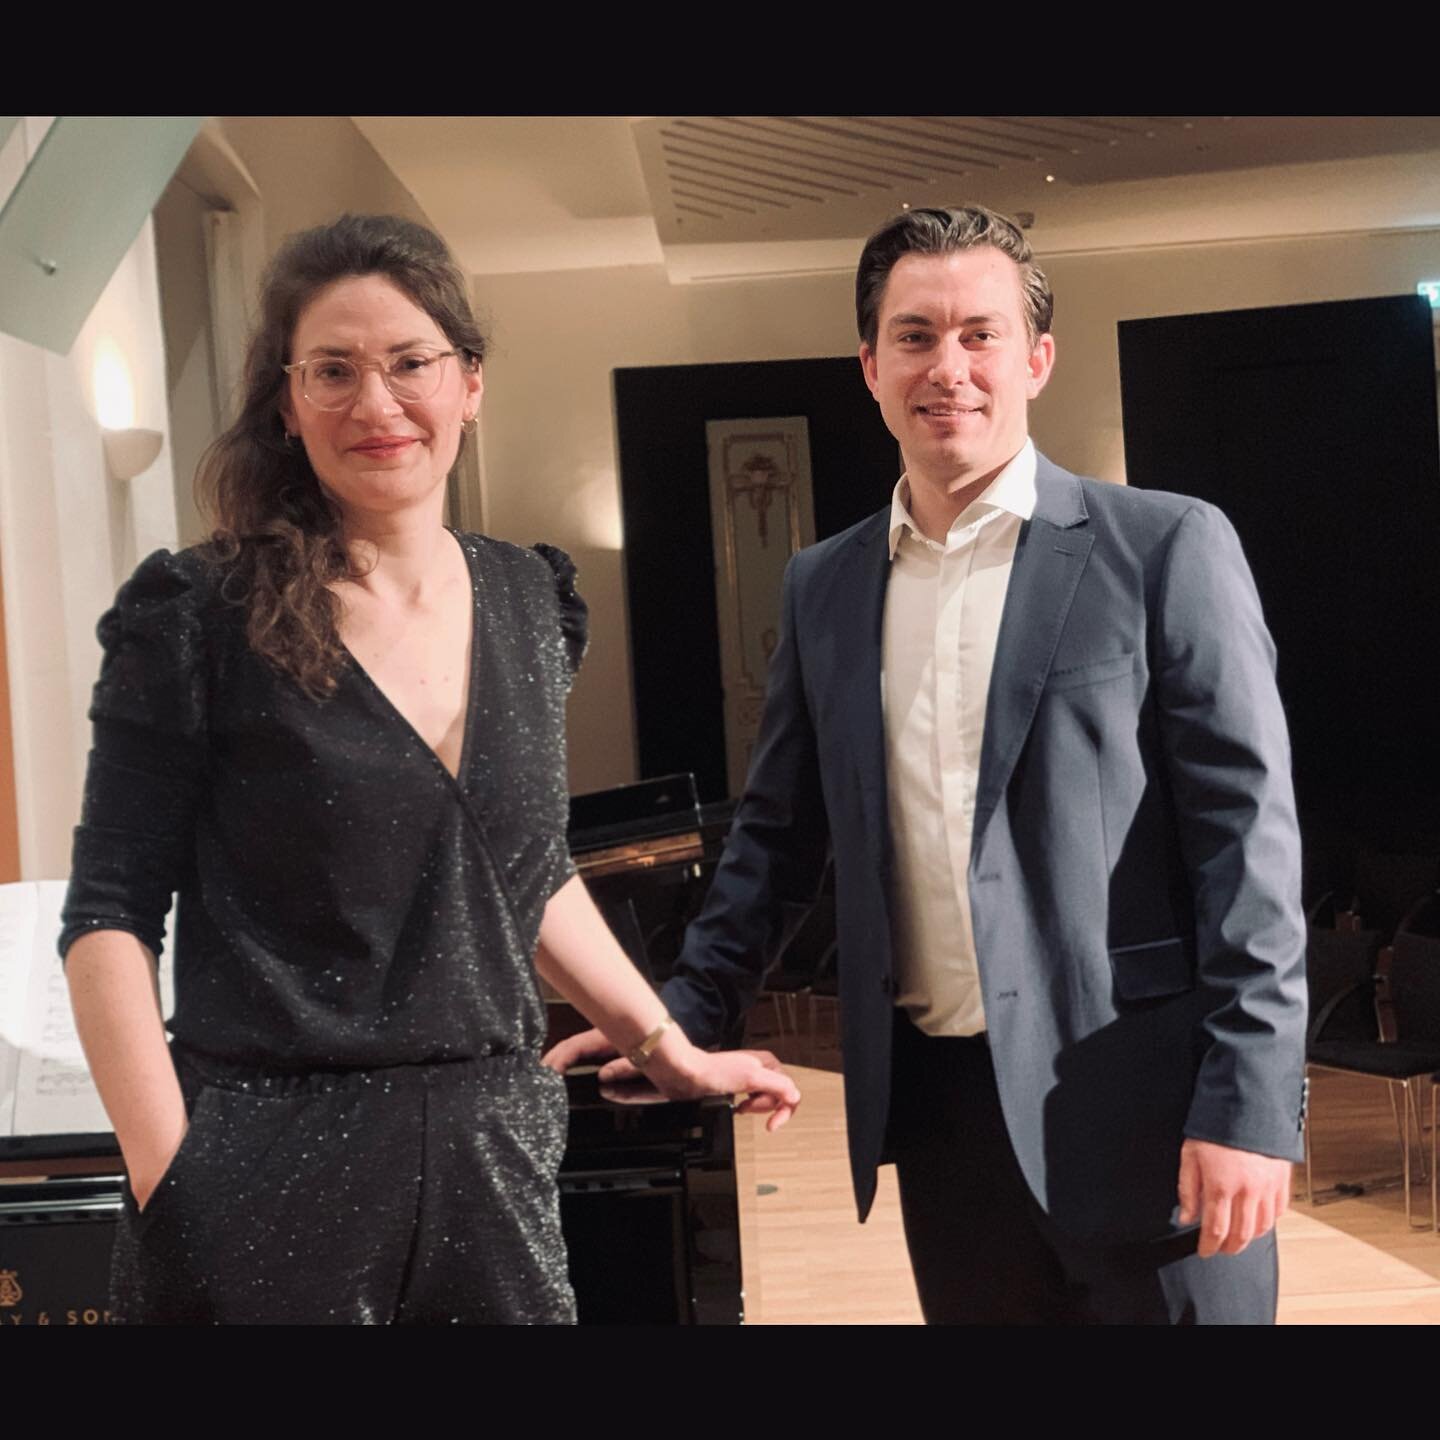 Seemingly the first day of spring: perfect day for the first Dichterliebe of the year. This time with bass-baritone @freddyjost. We had a lot of joy on stage and the audience responded with standing ovations. ⠀
⠀
#lied #liedduo #artsong #art #music #